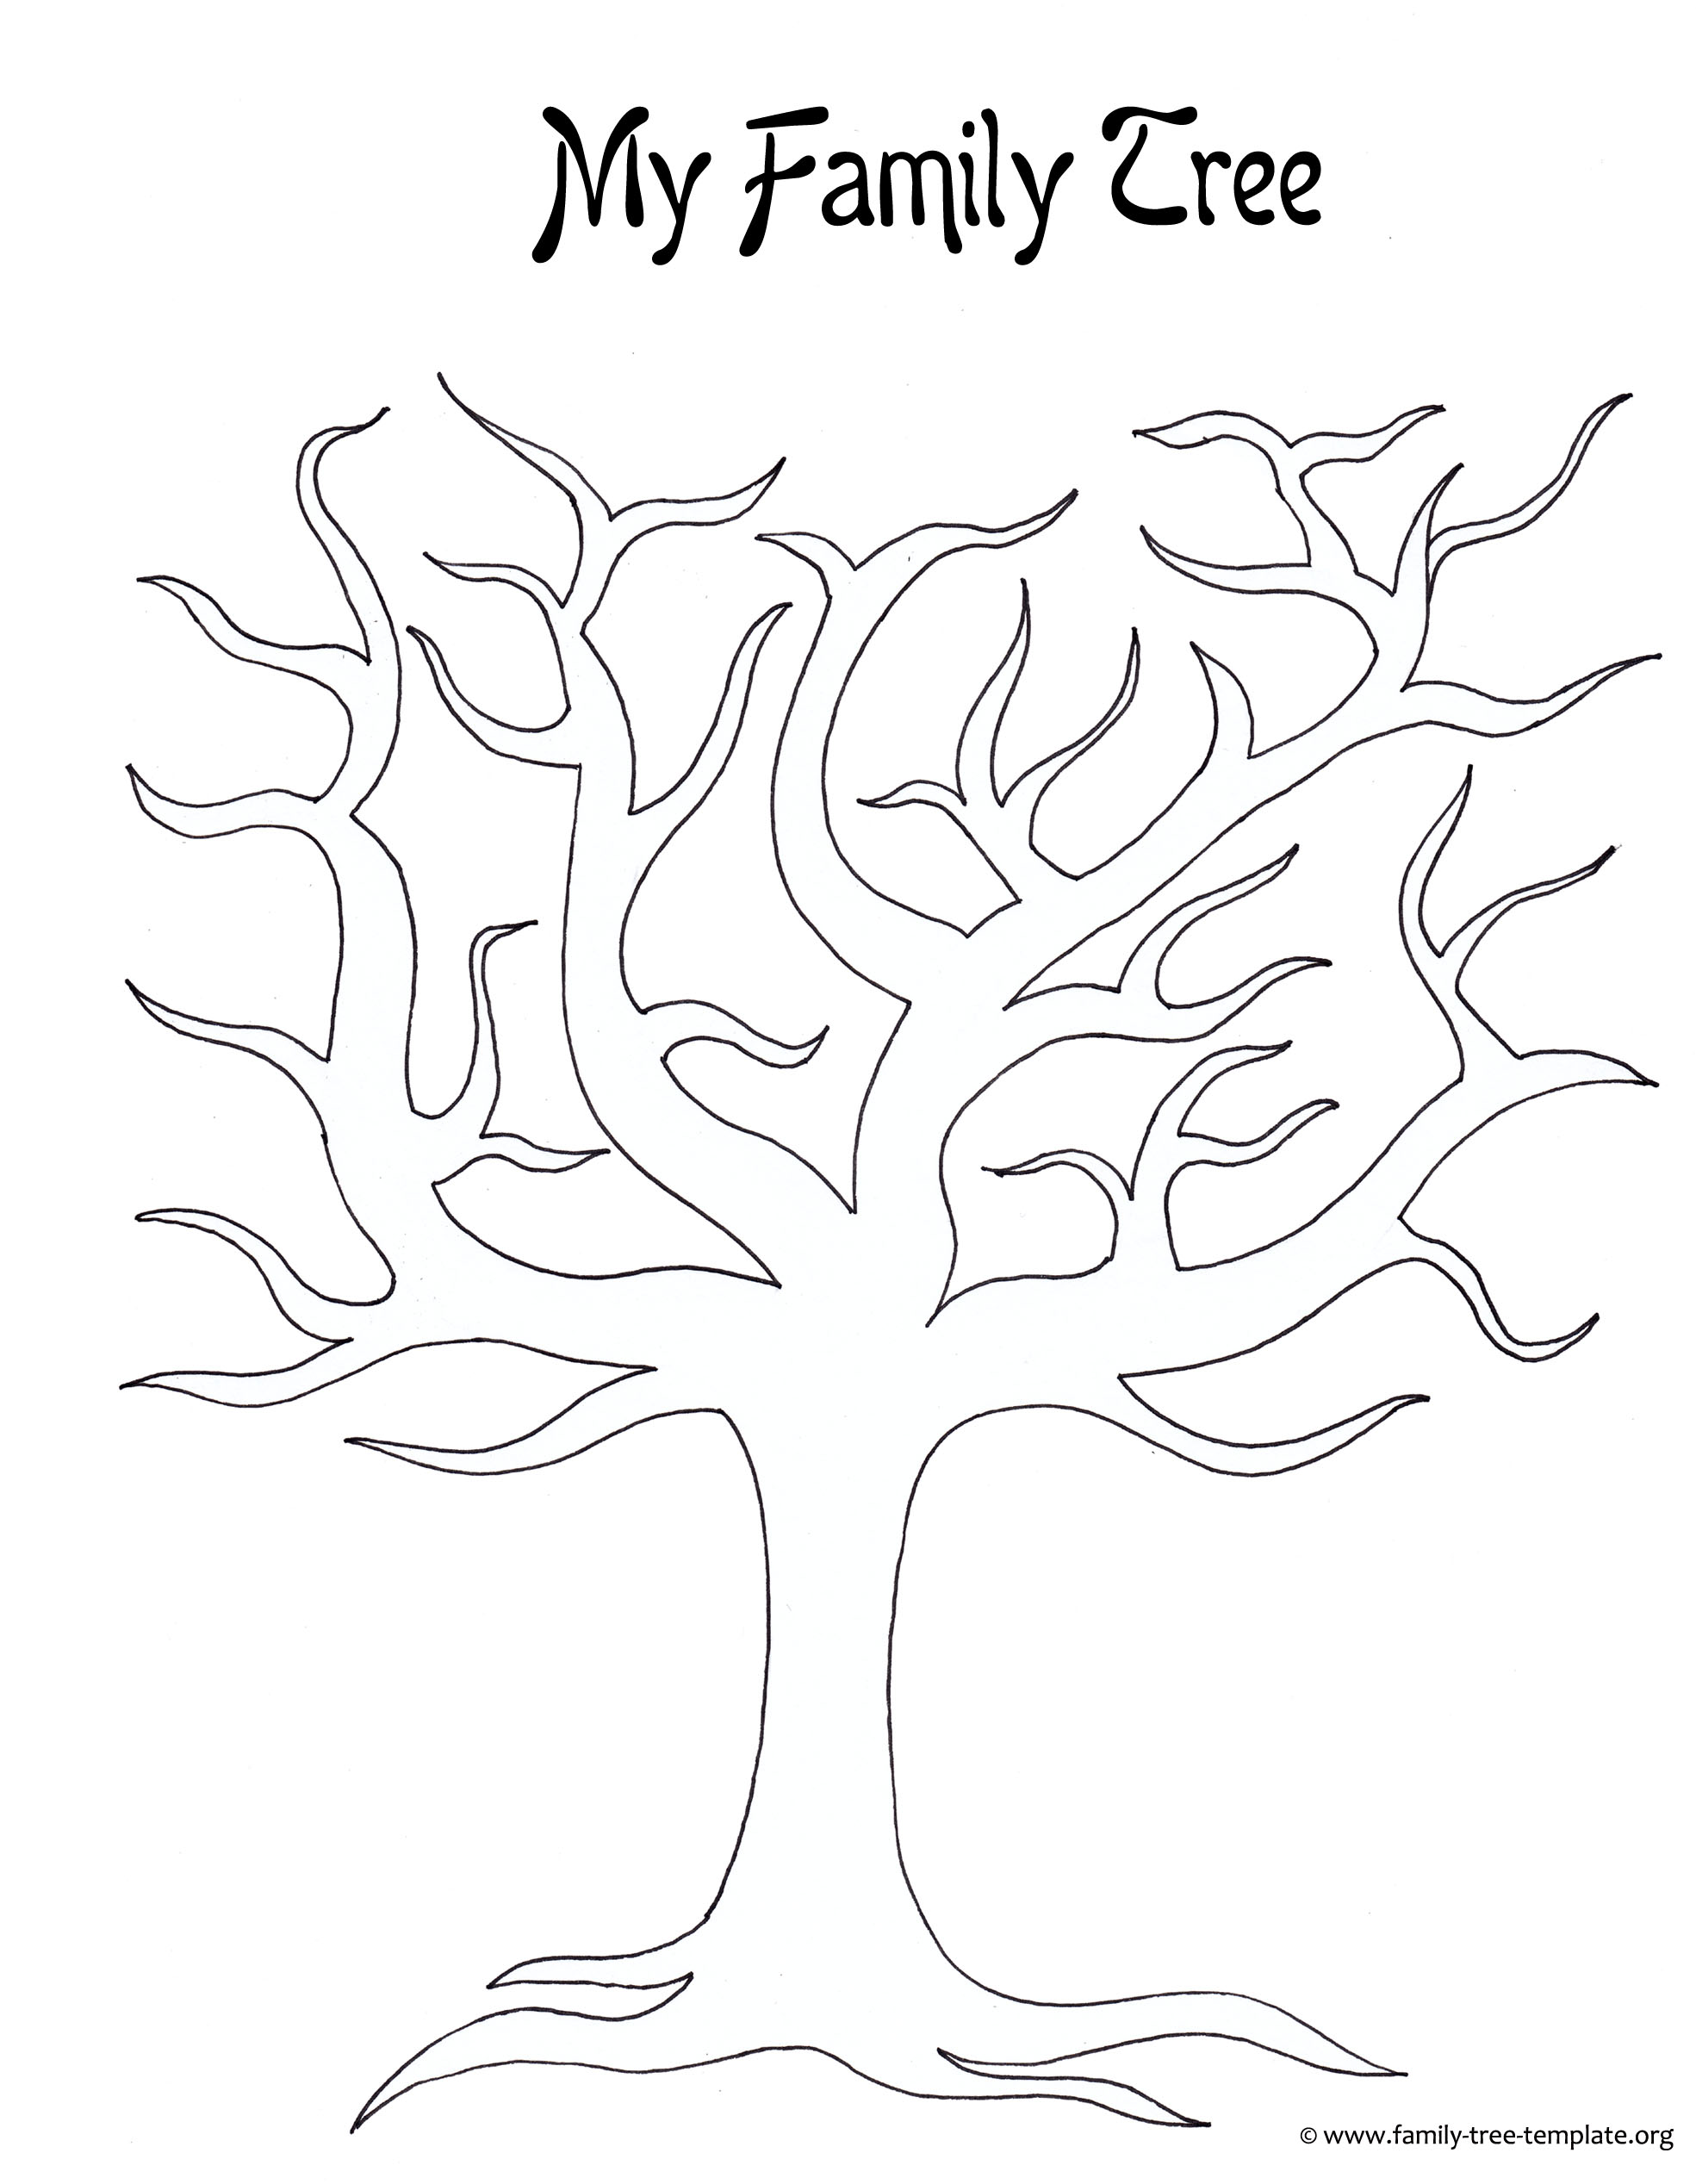 7 Best Images of Family Tree Outline Printable - Printable Family Tree ...